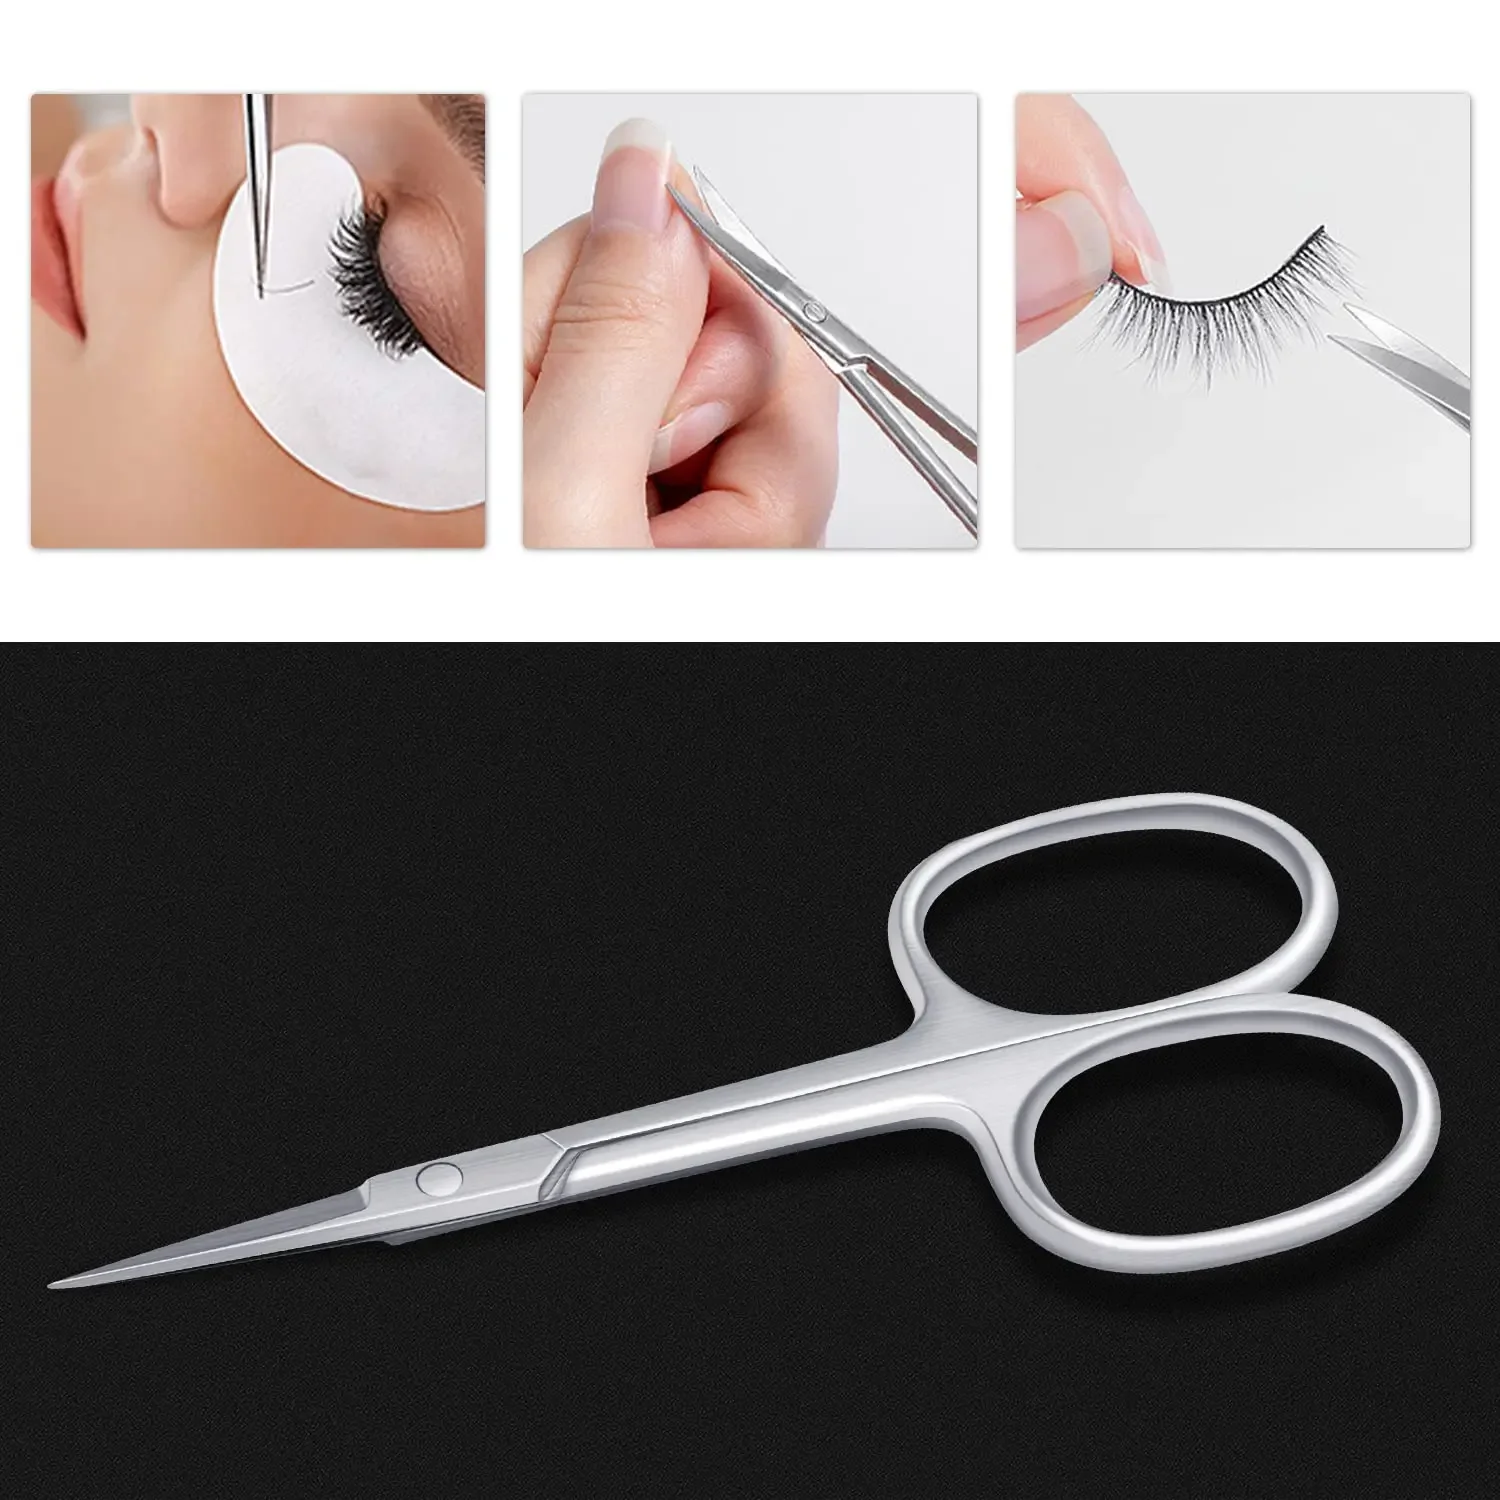 Cuticle Scissors Extra Fine Straight Curved Blade Scissors for Nails Eyebrow Eyelash Manicure Pedicure Beauty Grooming